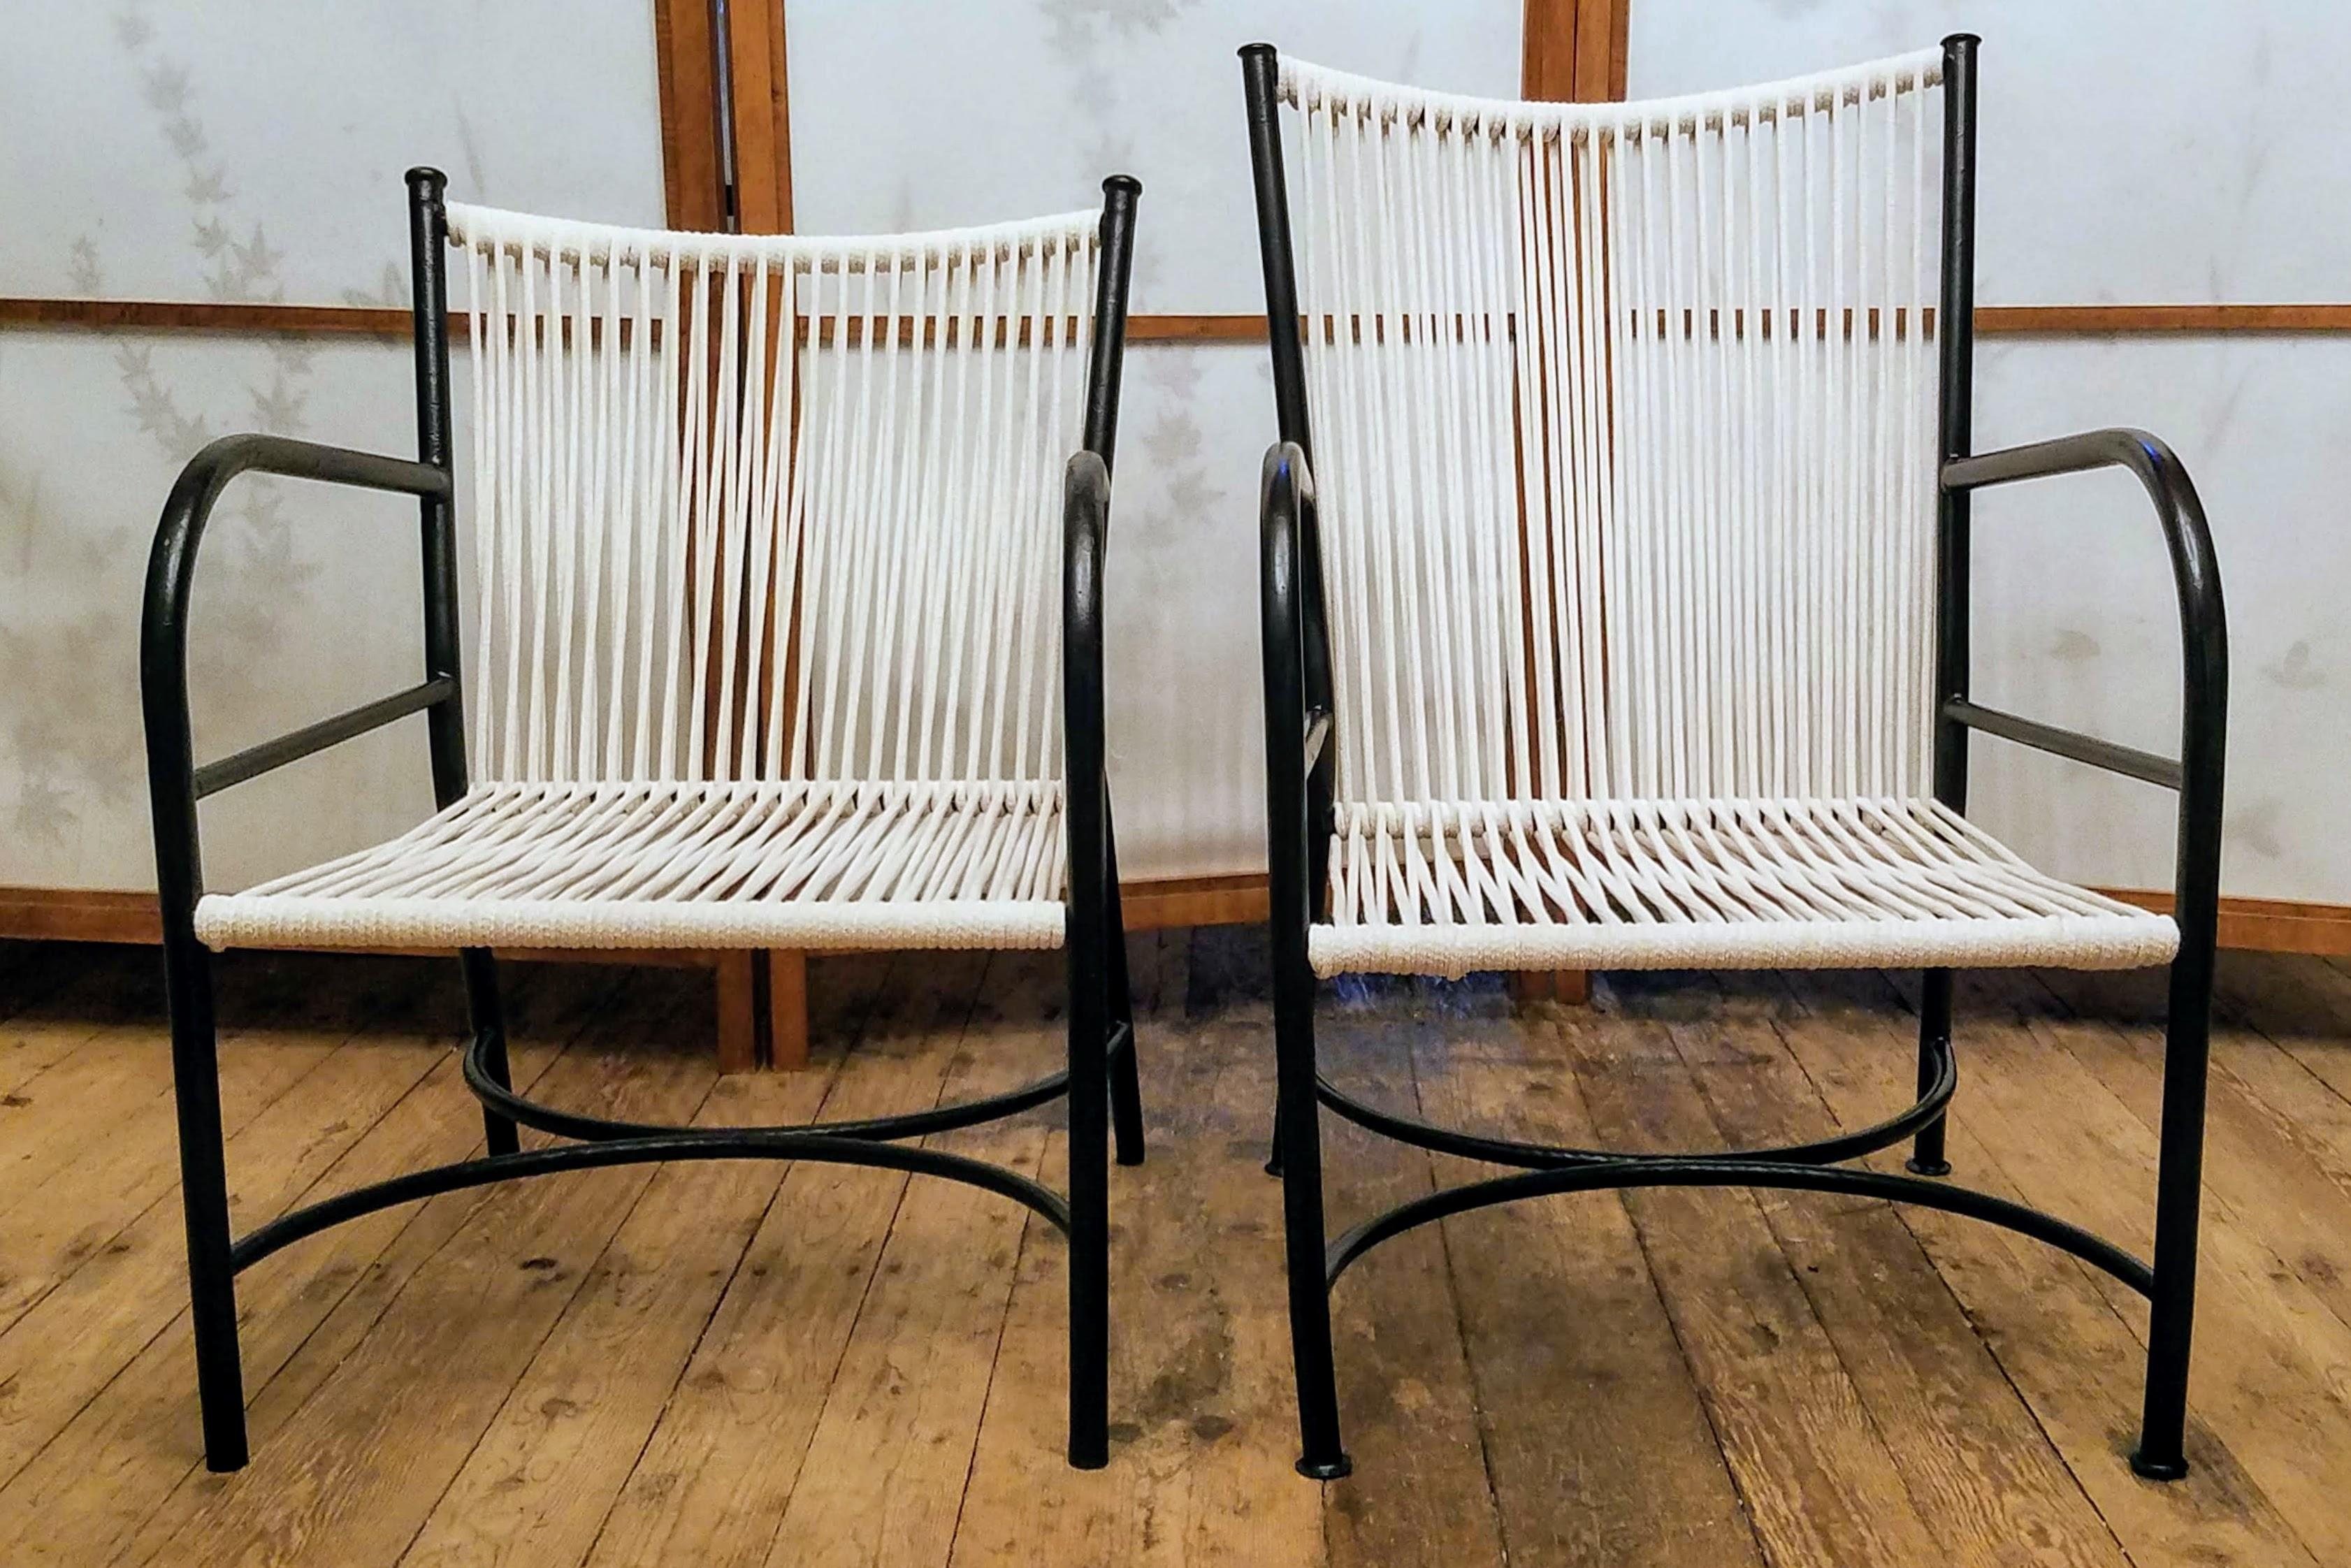 Robert Lewis suite of four lounge chairs hand made in his studio below Old Mission Santa Barbara in Santa Barbara, California in the 1930s.
Three of the four chairs have matching 29.5 inch tall backs and one has a 33.5 inch tall back.
All four are